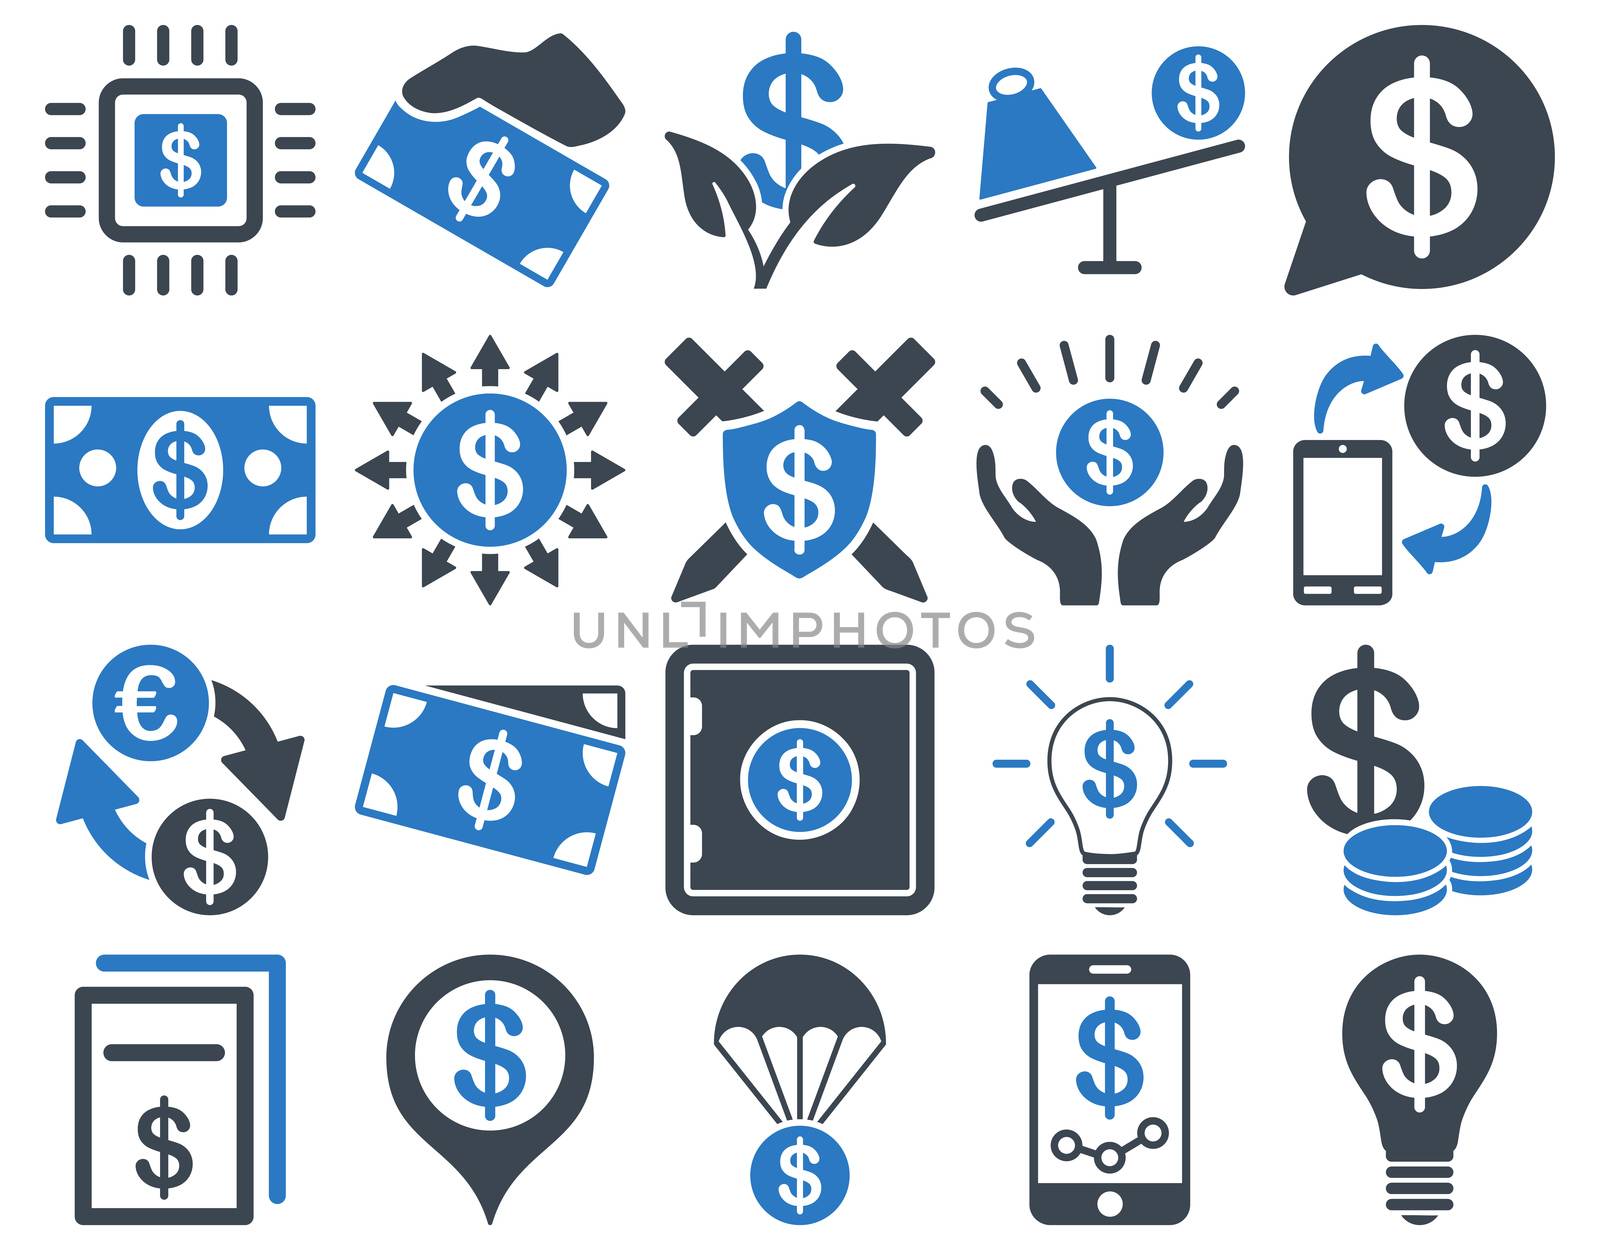 Dollar Icon Set. These flat bicolor icons use smooth blue colors. Raster images are isolated on a white background.